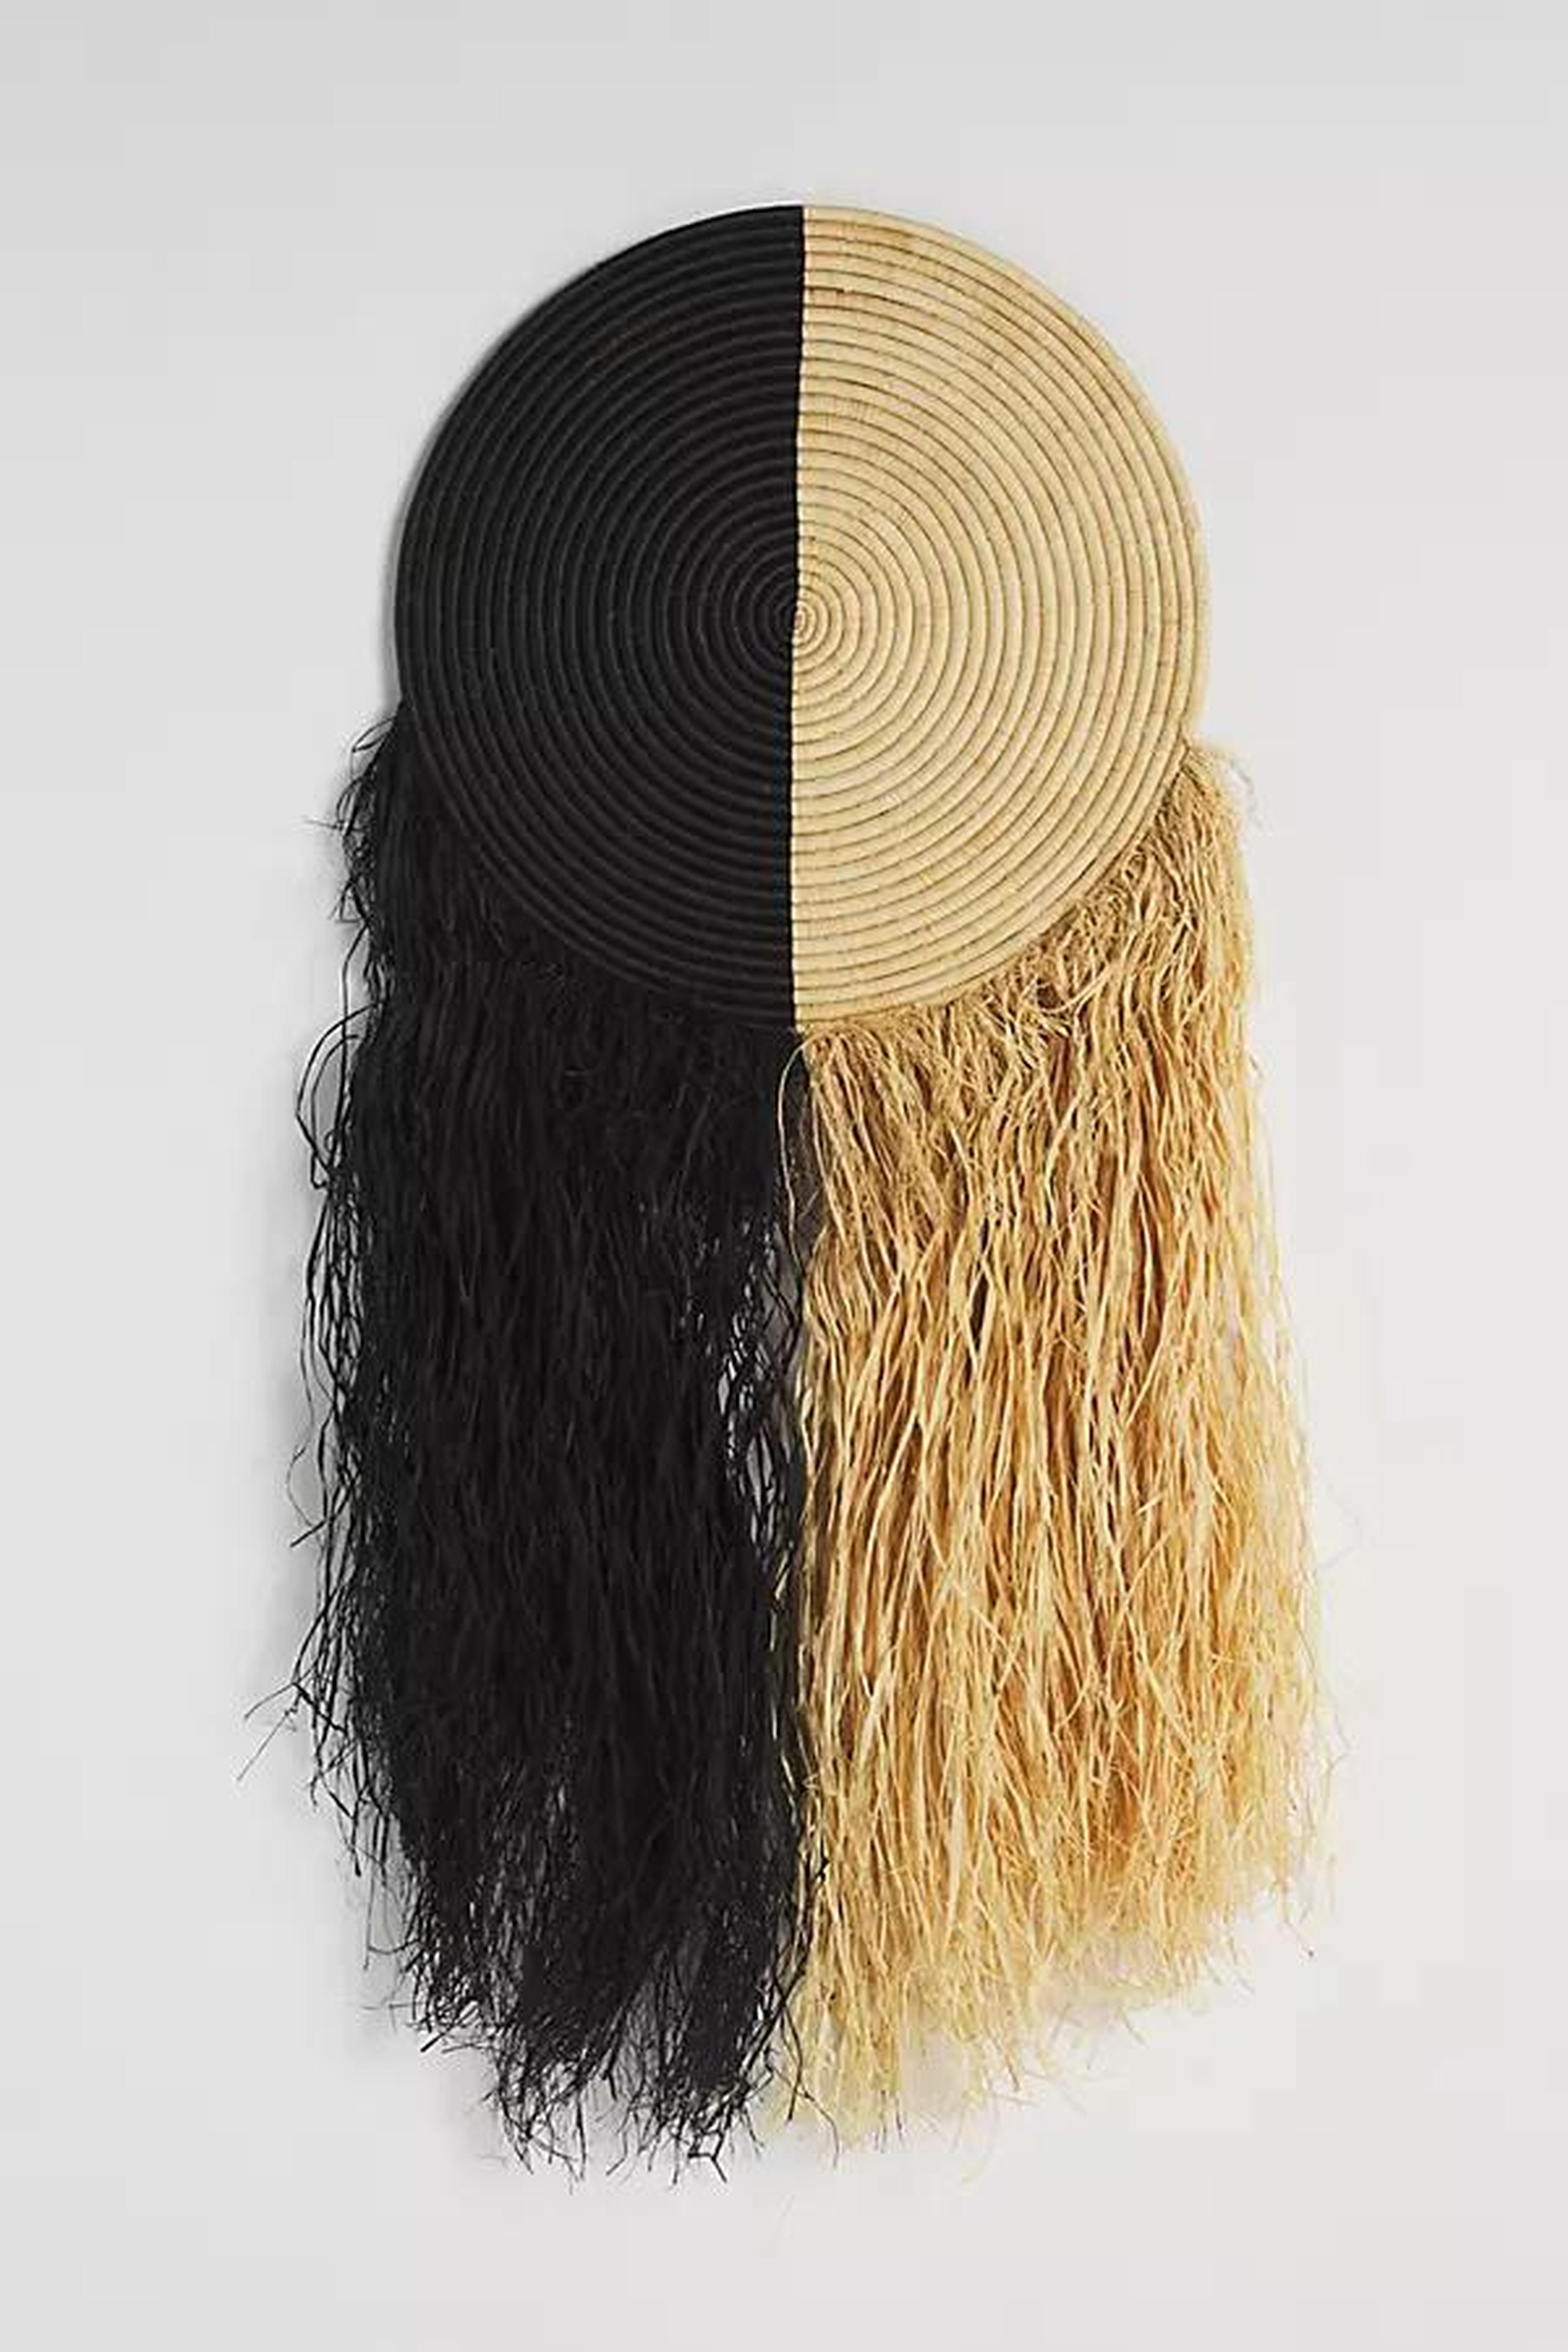 Cascading Fringe Hanging Basket By All Across Africa in Assorted - Anthropologie